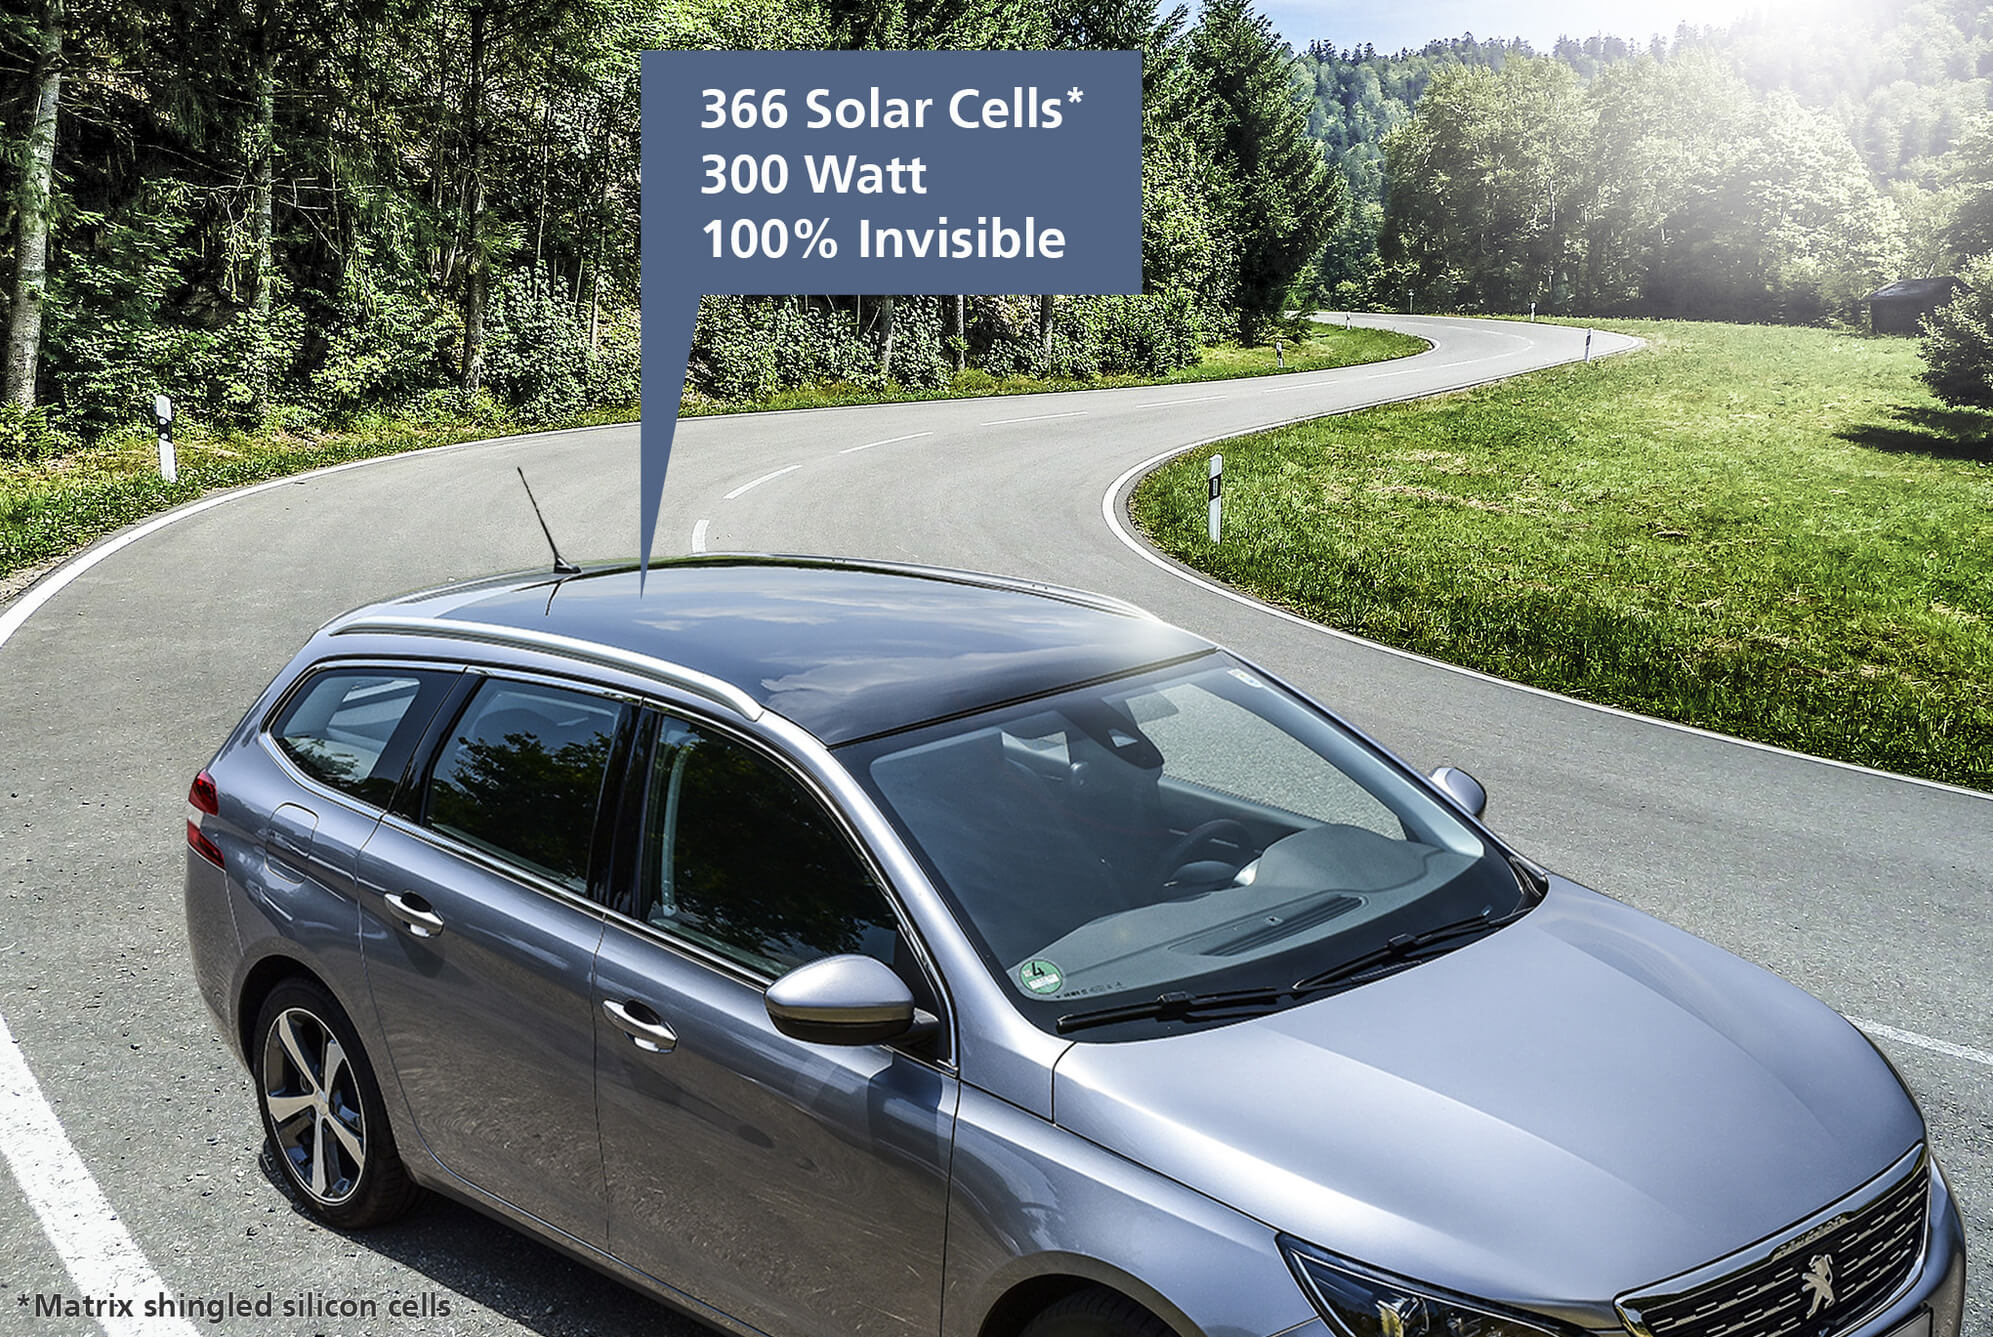 invisibly integrated solar cells in the car roof